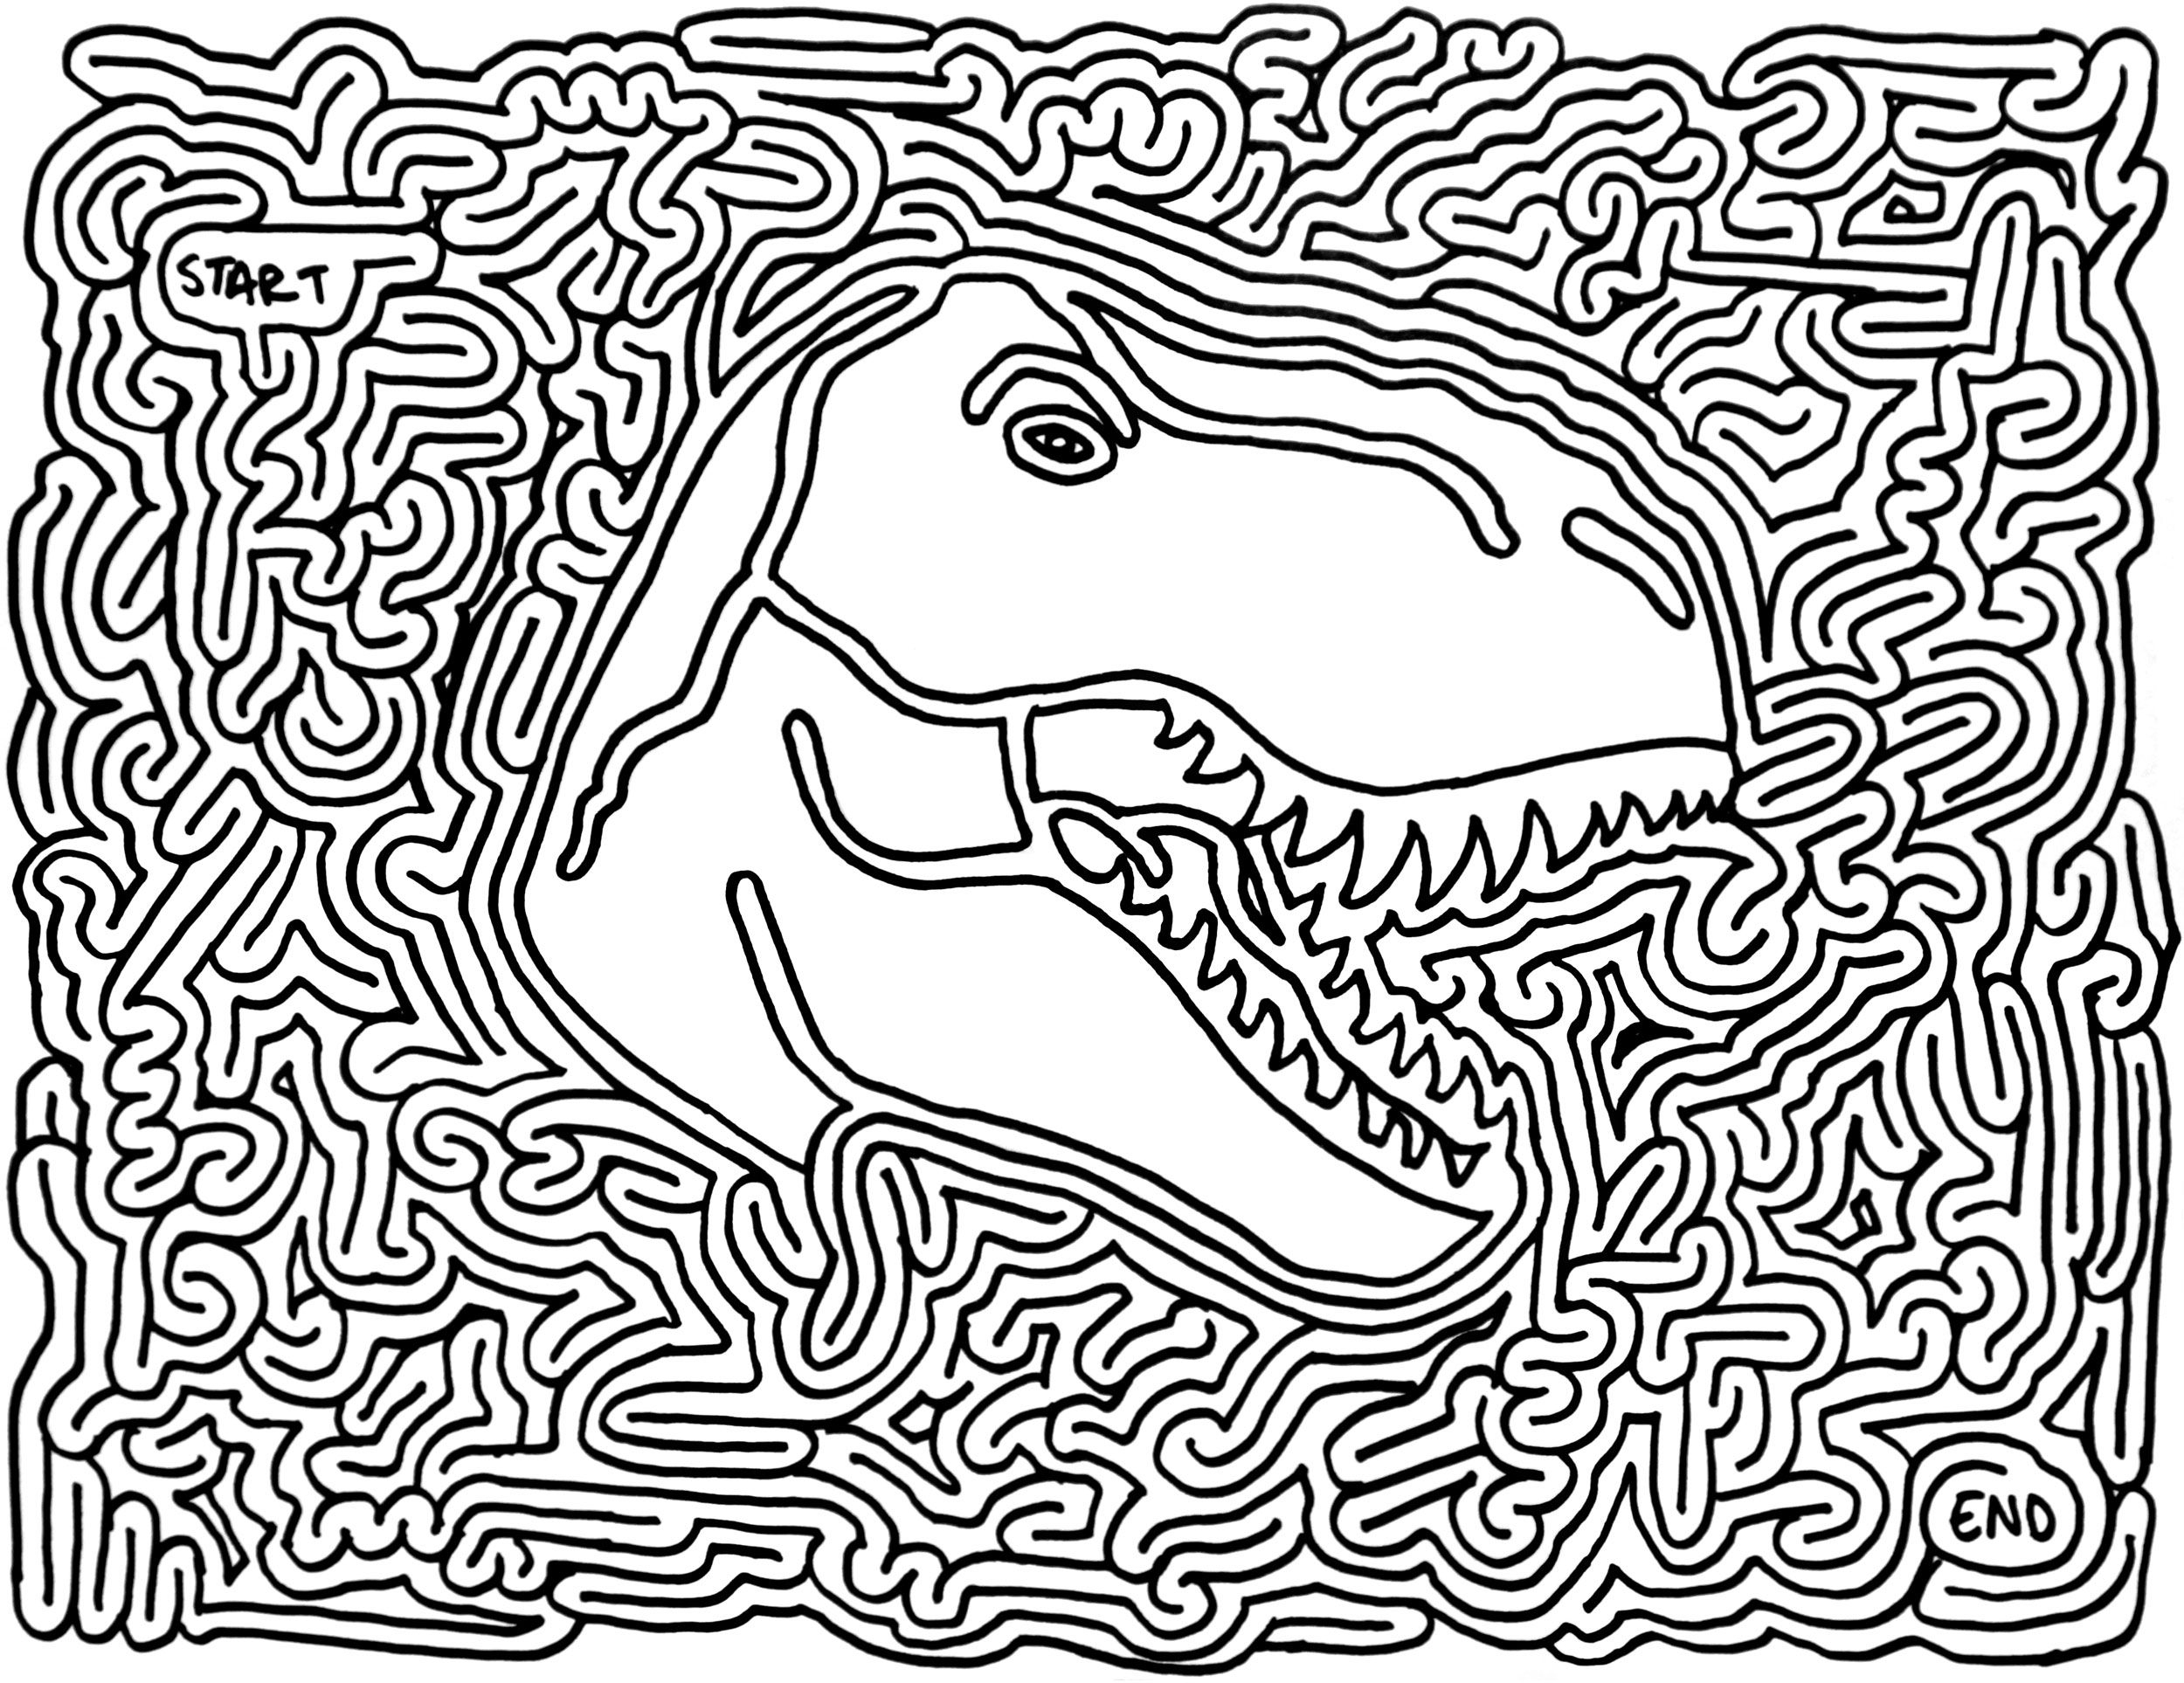 Printable Mazes - Best Coloring Pages For Kids - Printable Puzzles Mazes